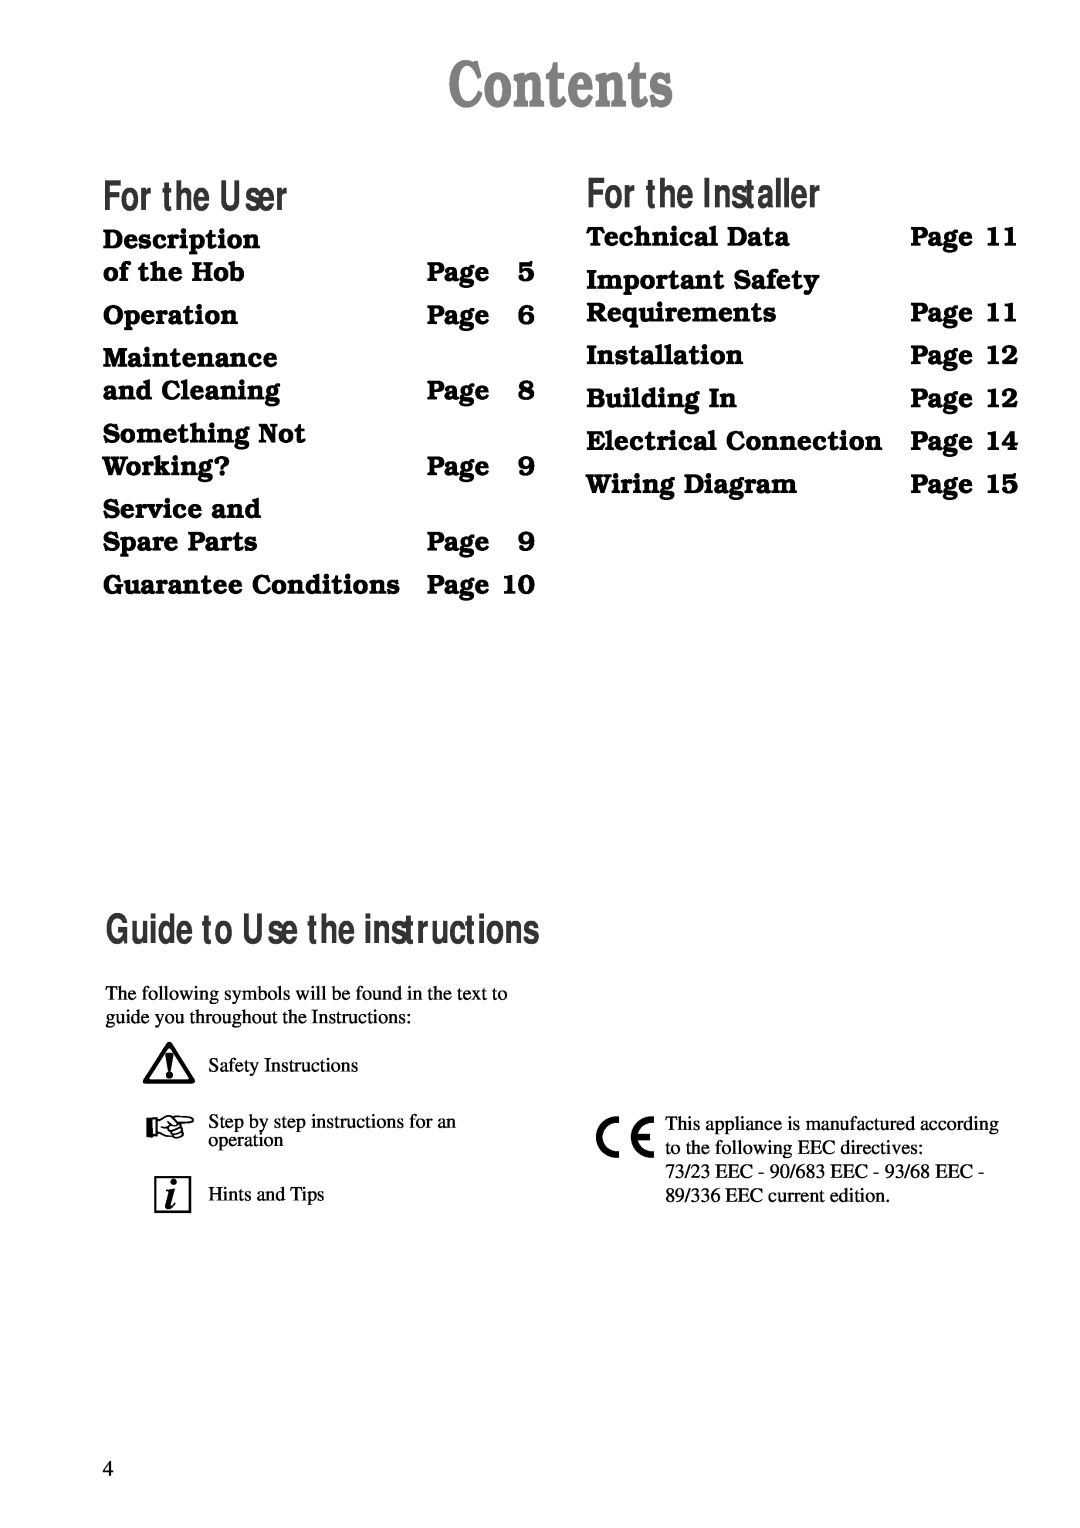 Zanussi ZEA 85 manual Contents, For the User, For the Installer, Guide to Use the instructions 